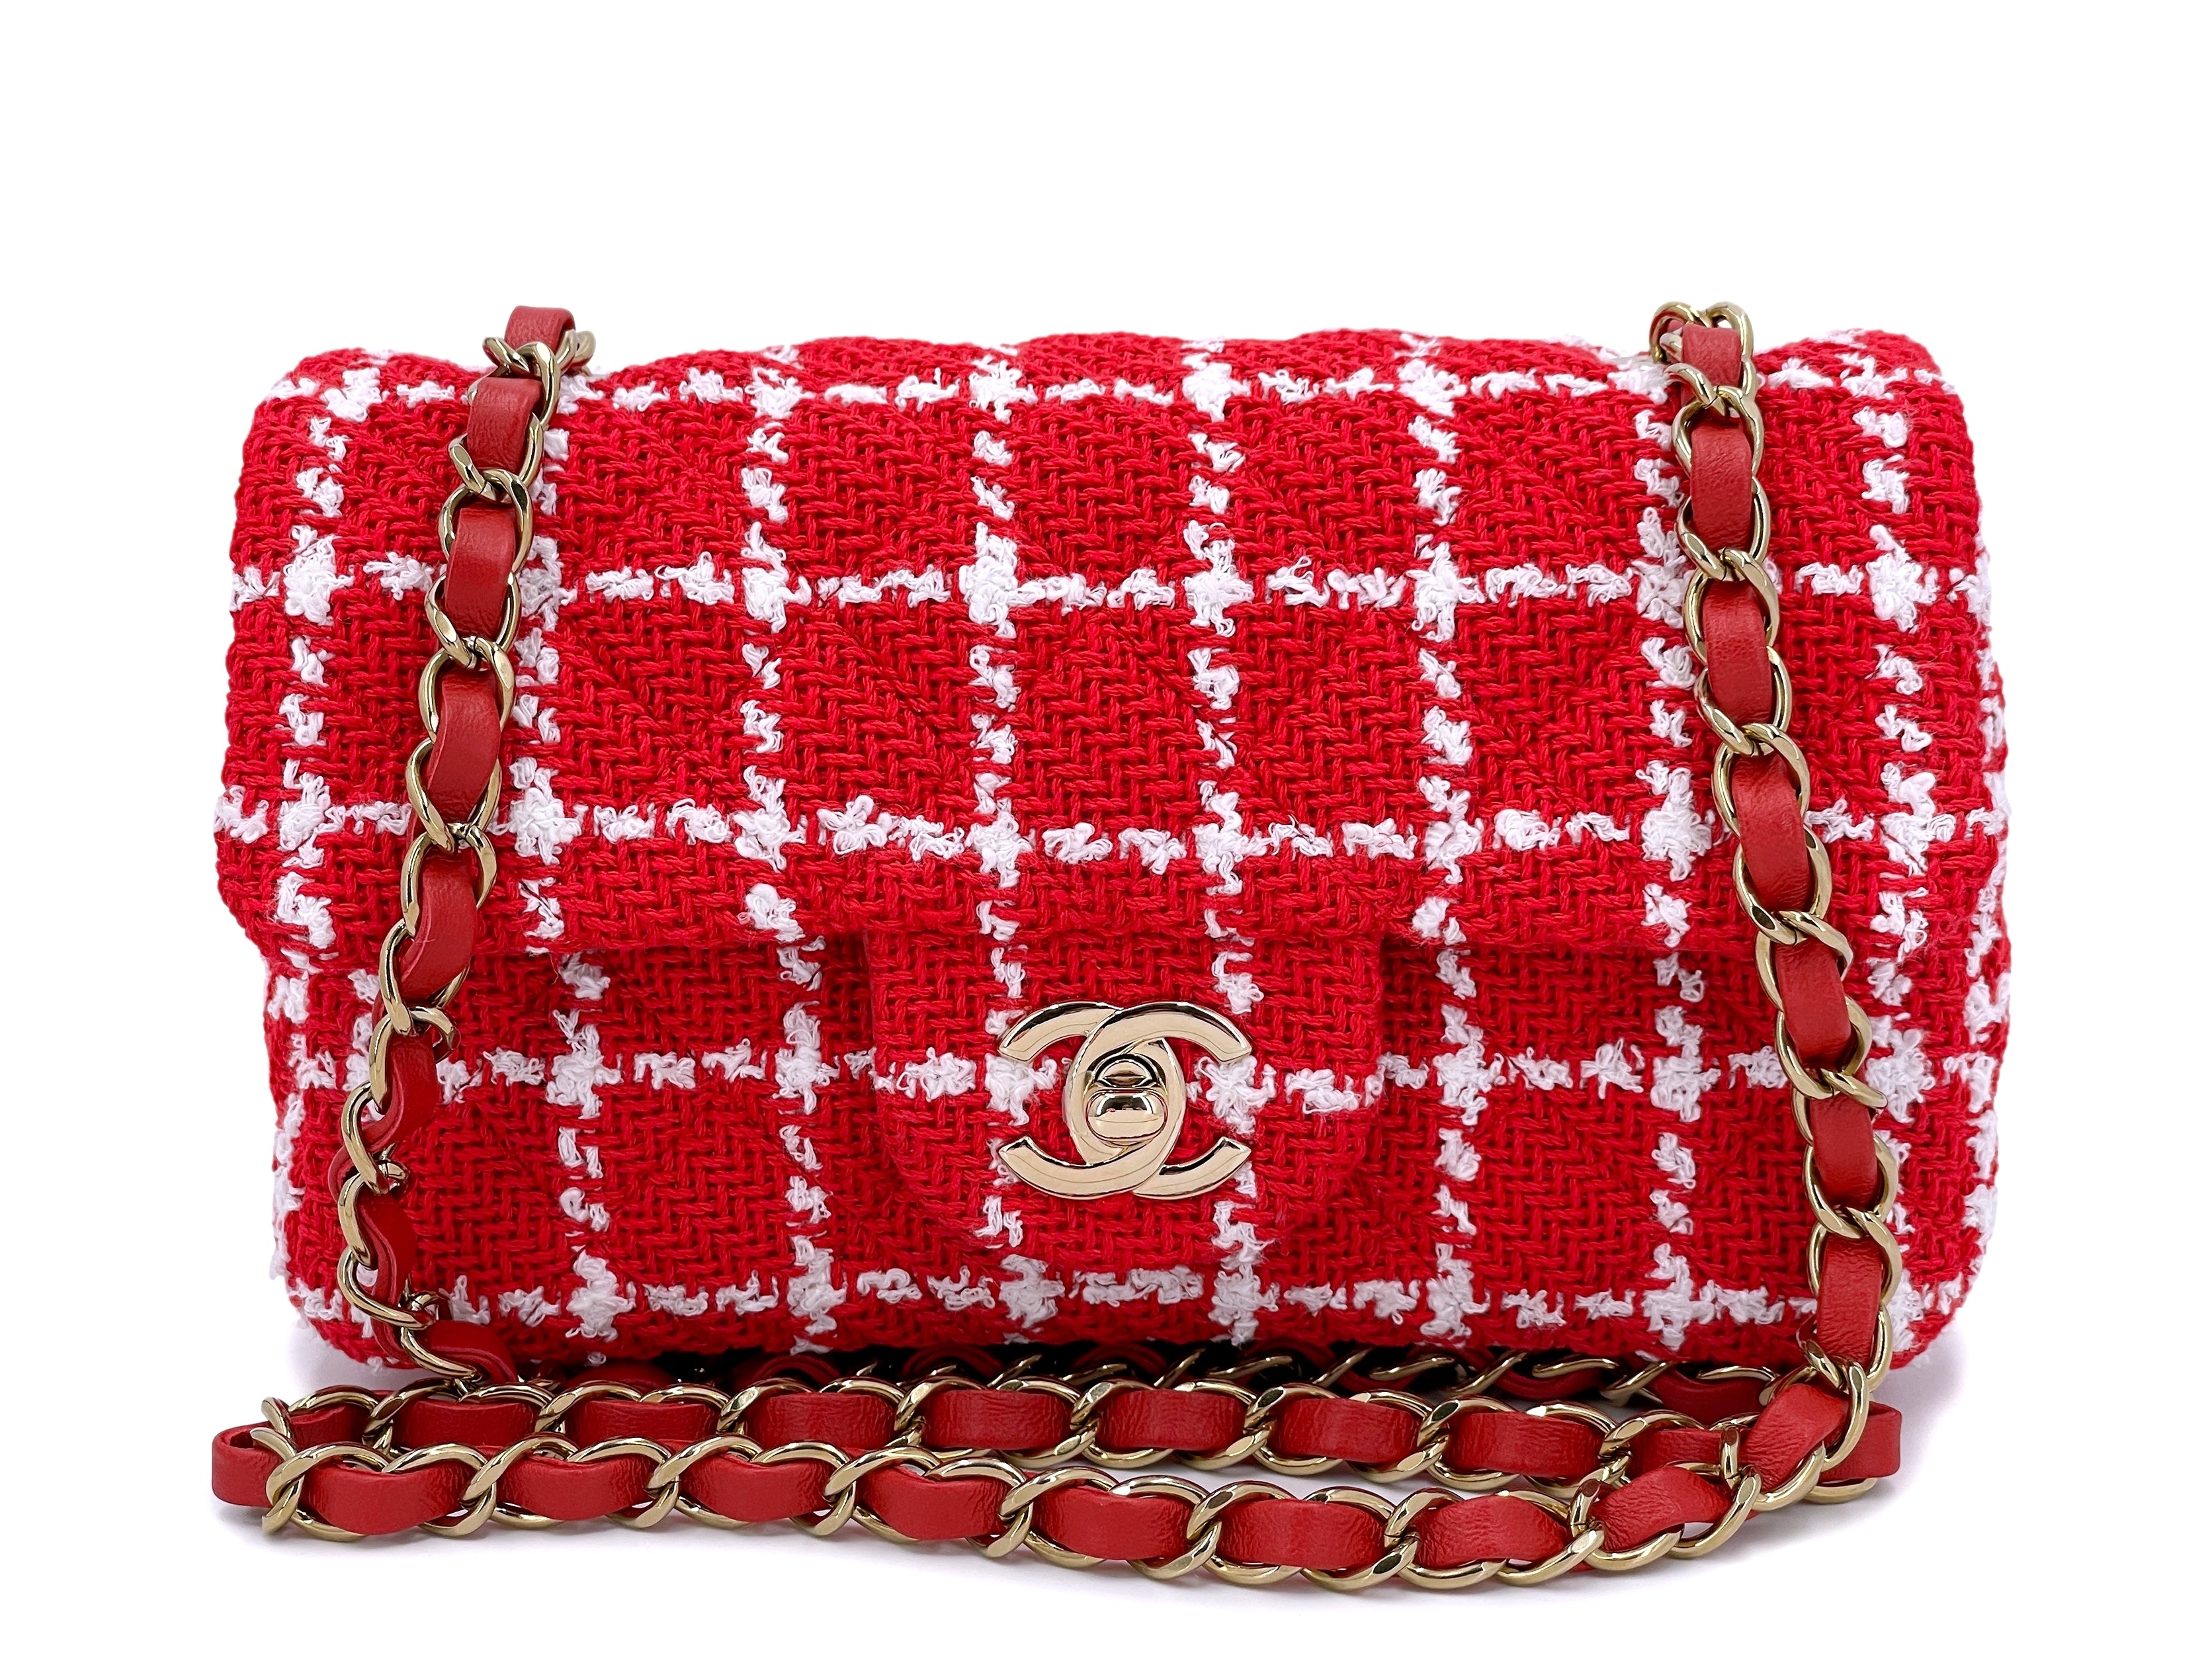 Chanel - Authenticated 2.55 Handbag - Tweed Red Abstract for Women, Never Worn